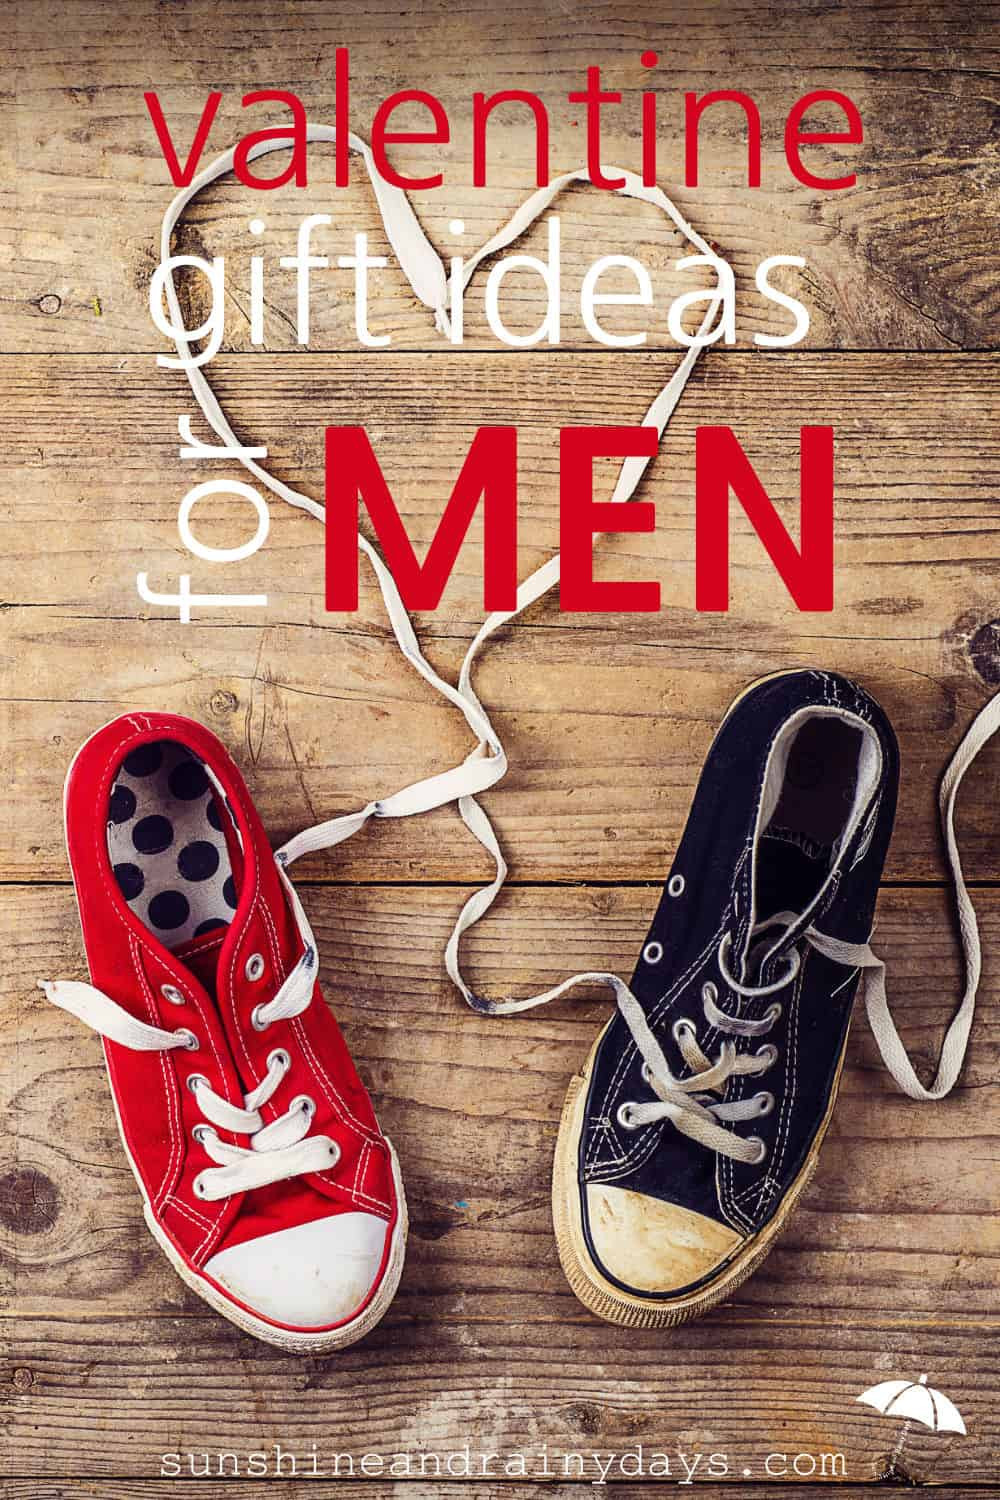 Gift Ideas For Guys On Valentines
 Valentine Gift Ideas For Men Sunshine and Rainy Days